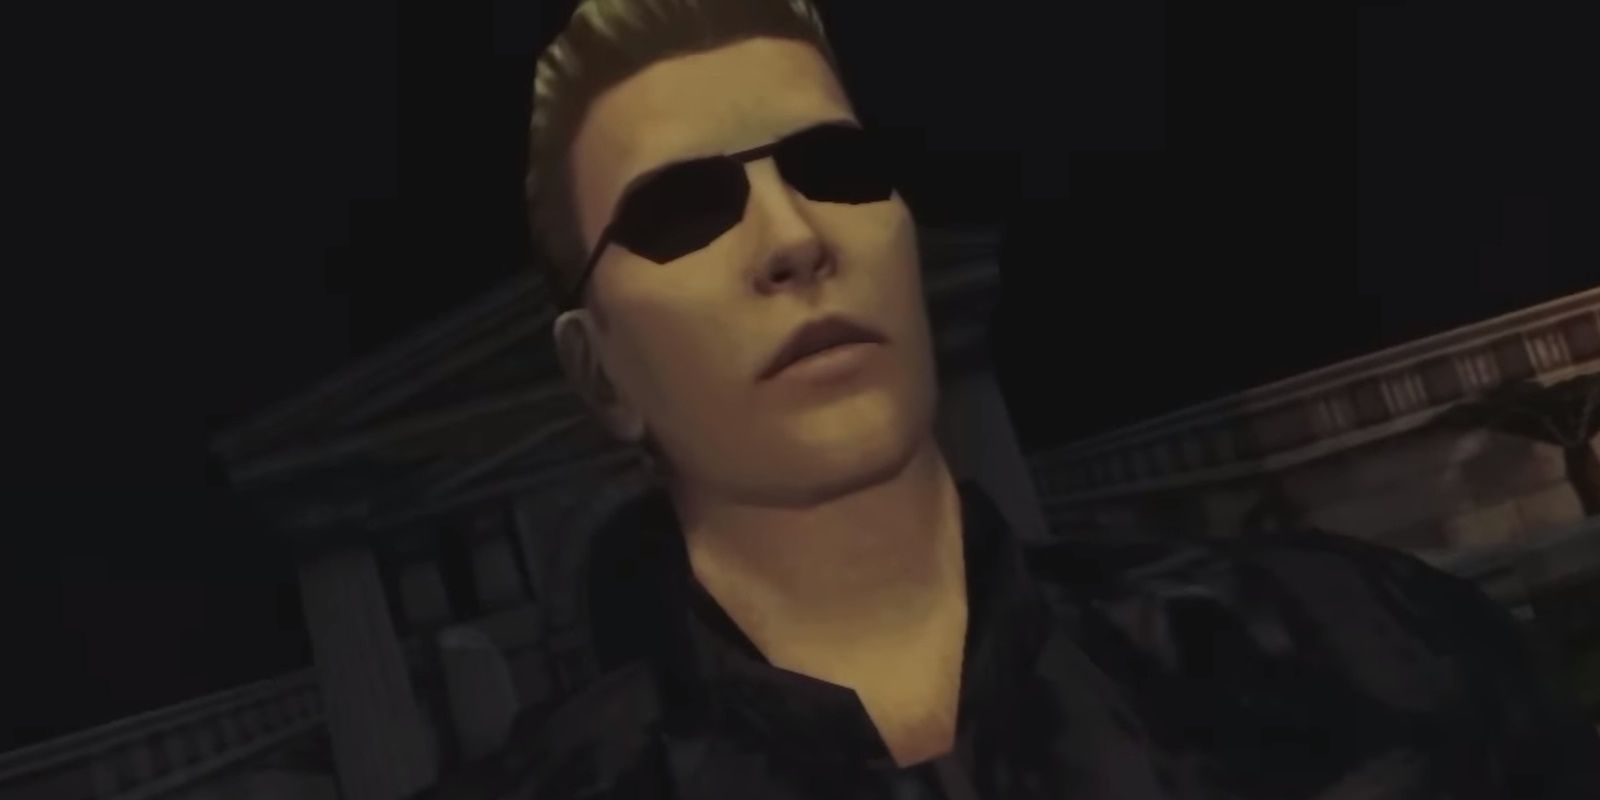 albert wesker staring ahead at someone off-screen